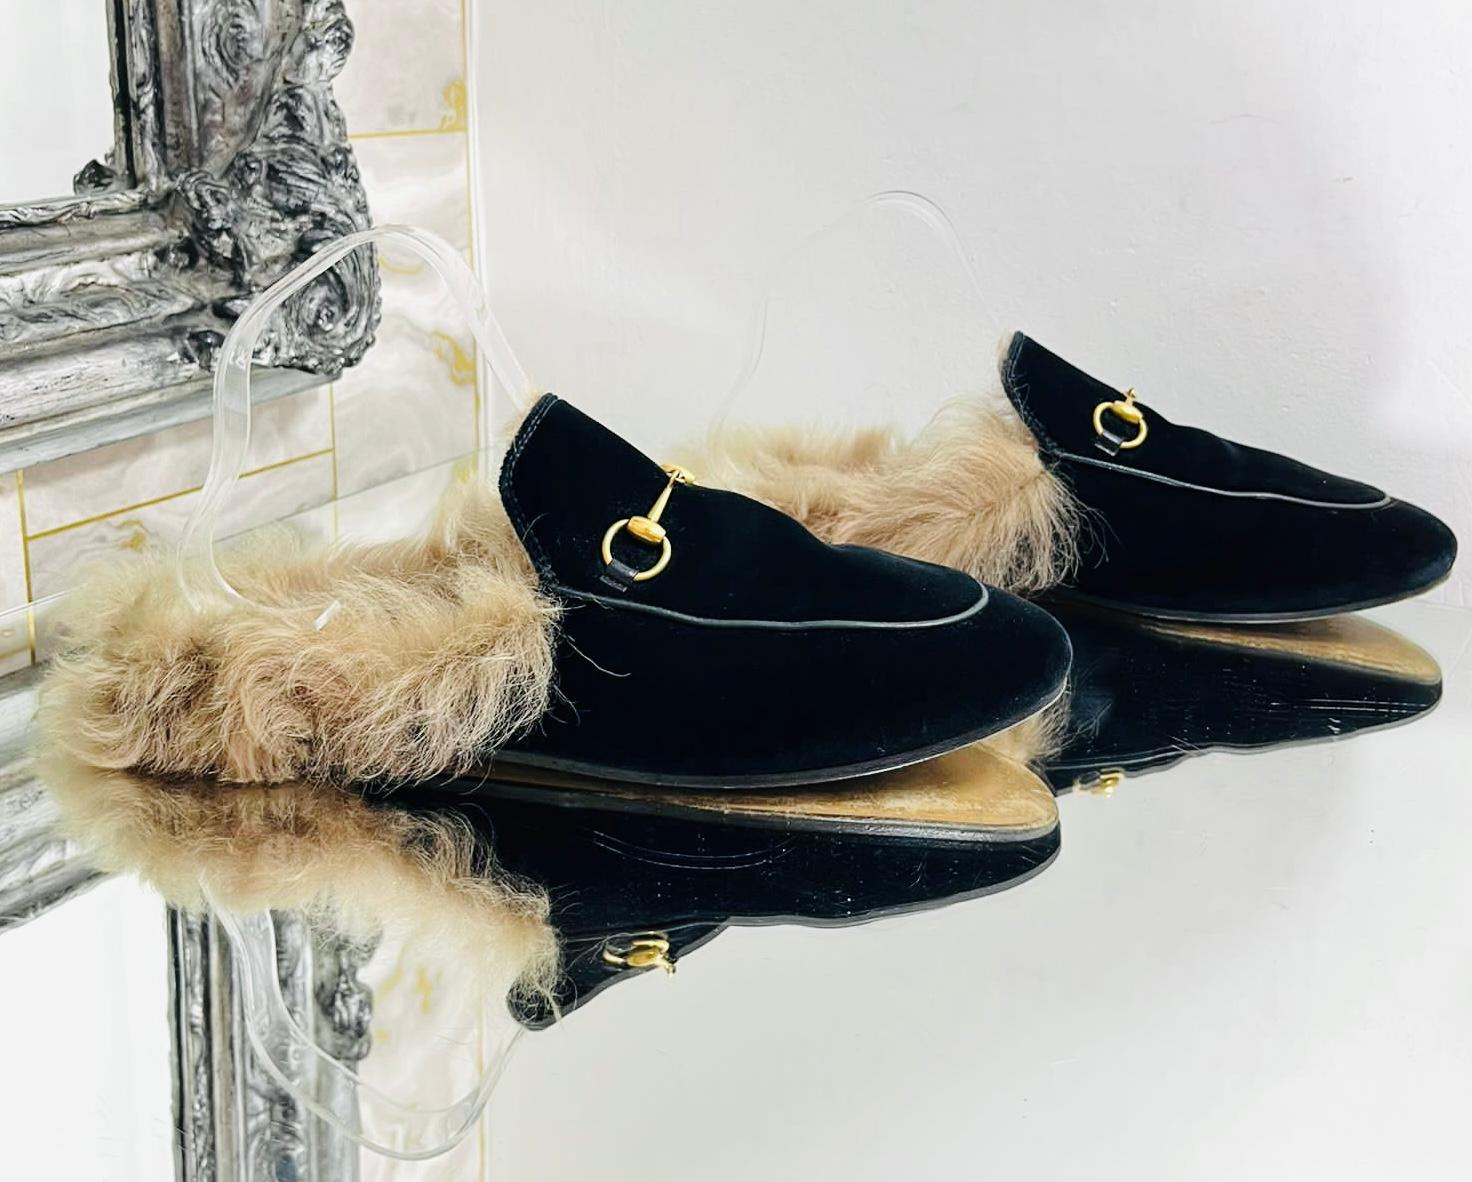 Women's Gucci Princetown Suede Shearling-Lined Mules